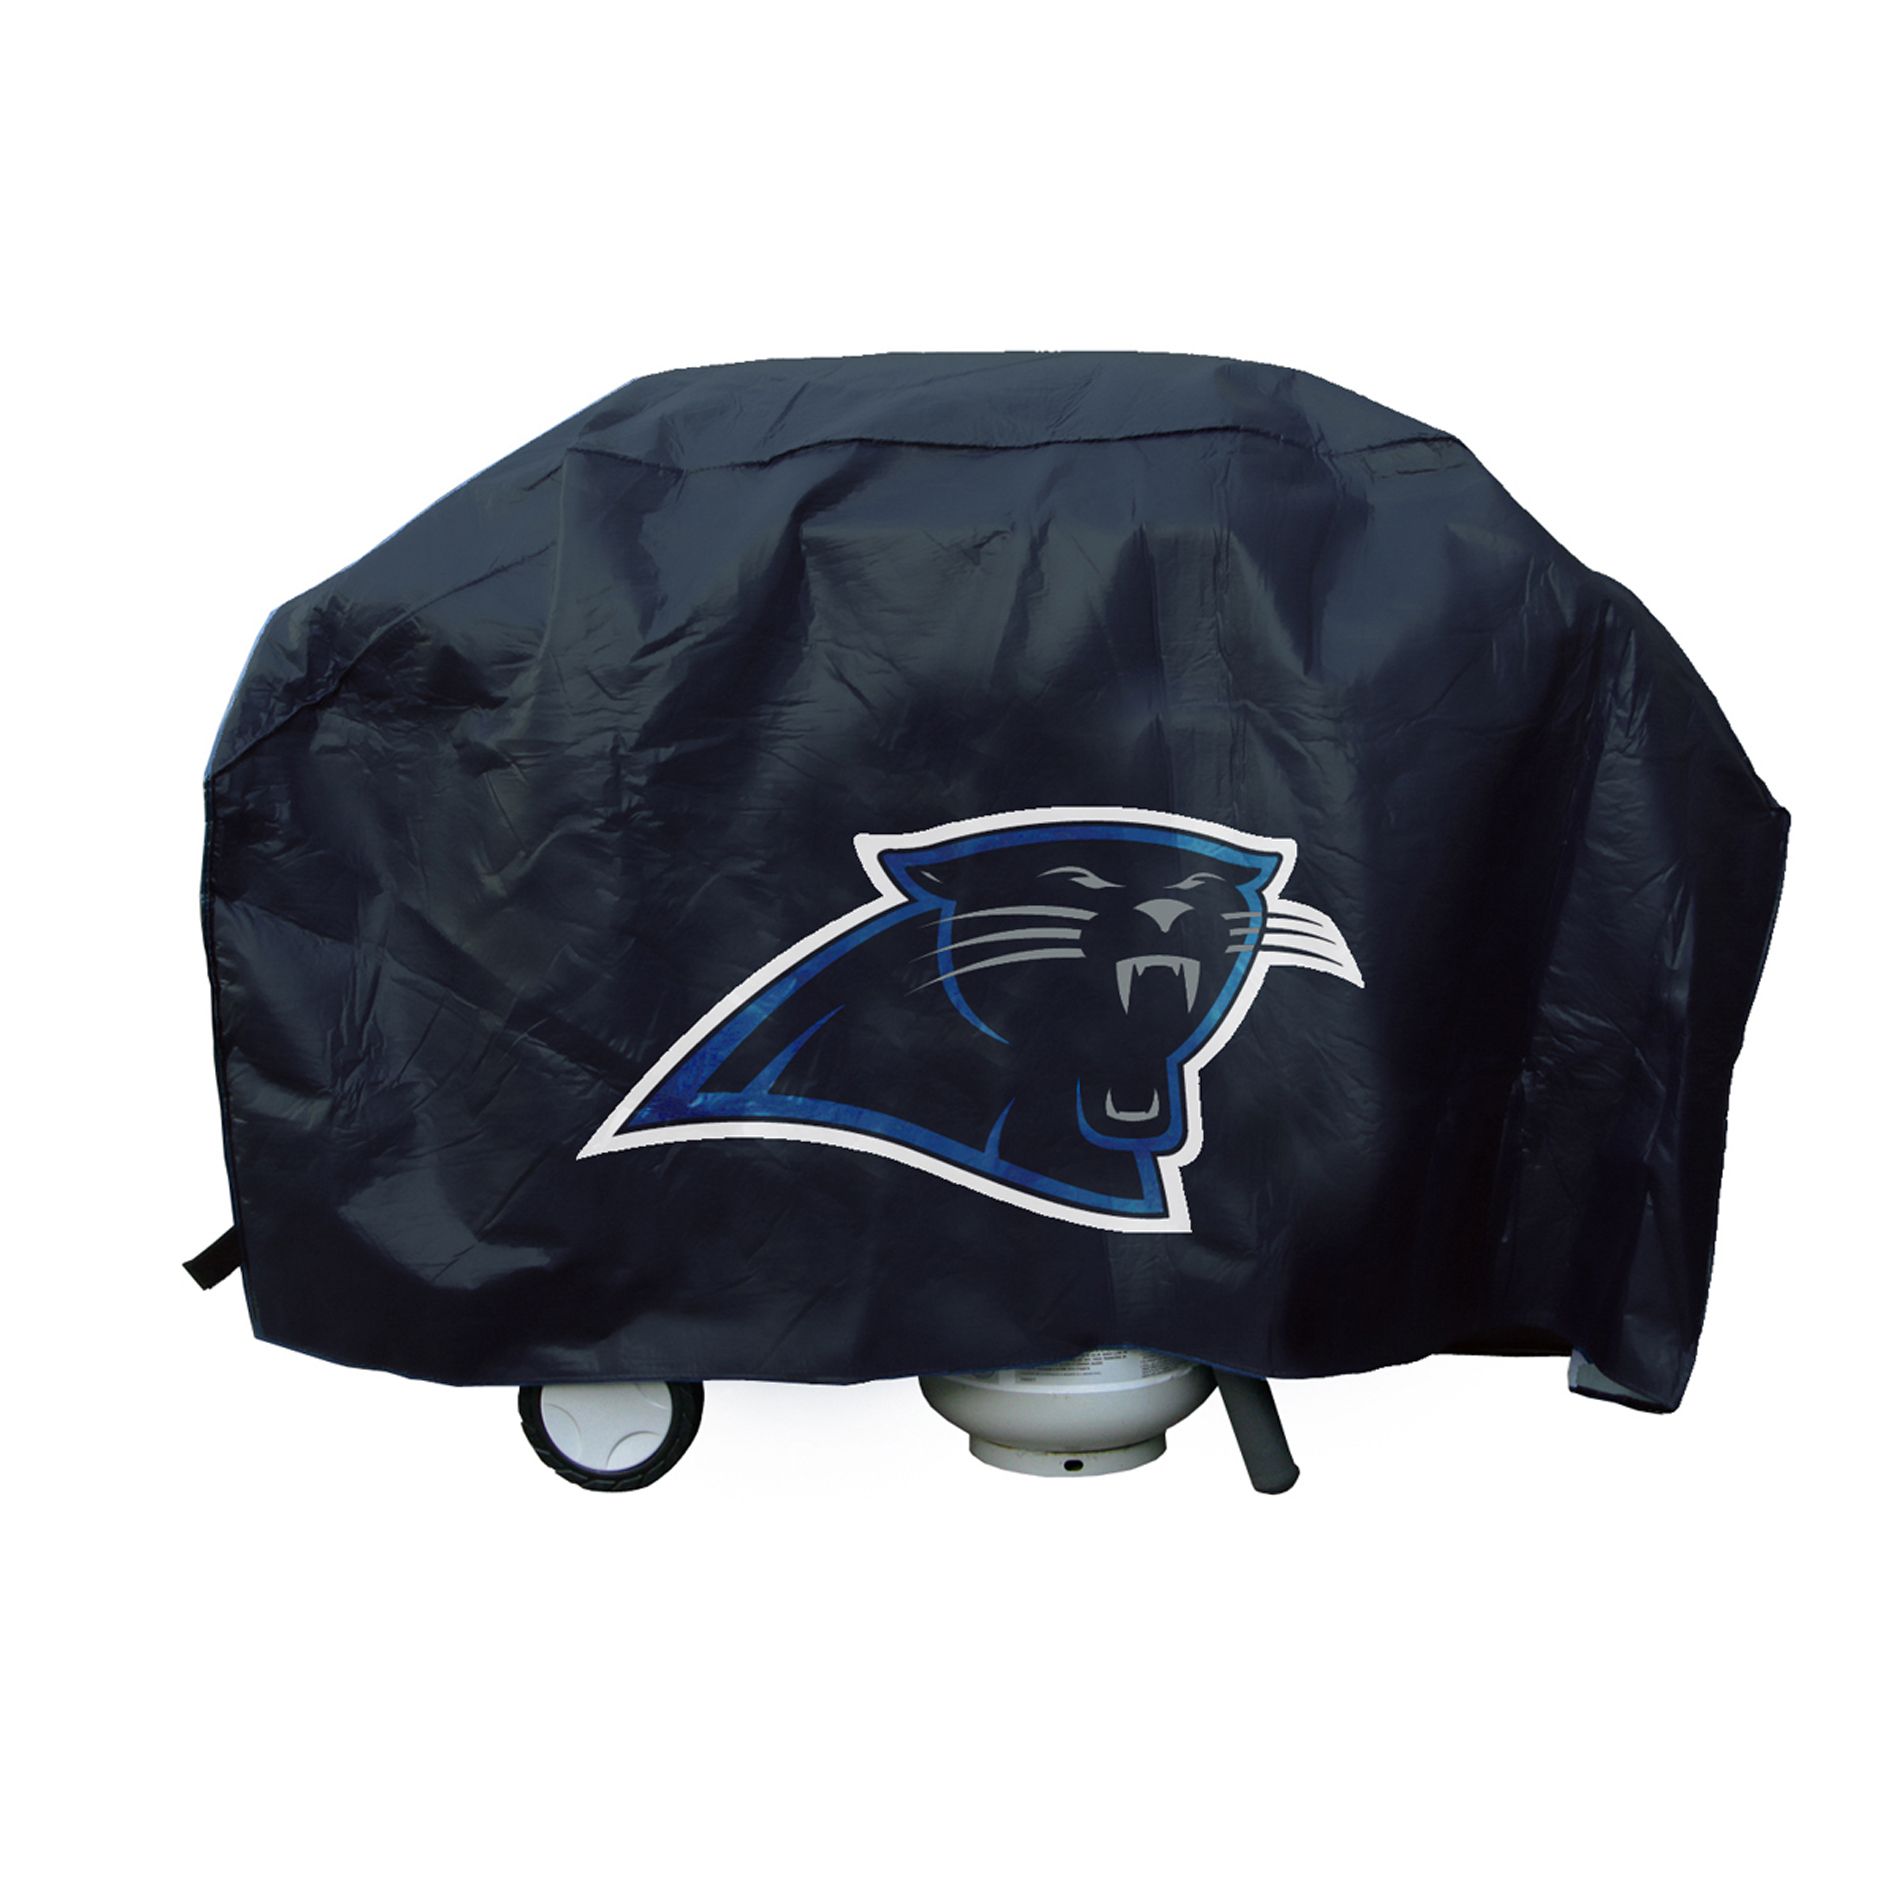 Rico Carolina Panthers Deluxe Grill Cover